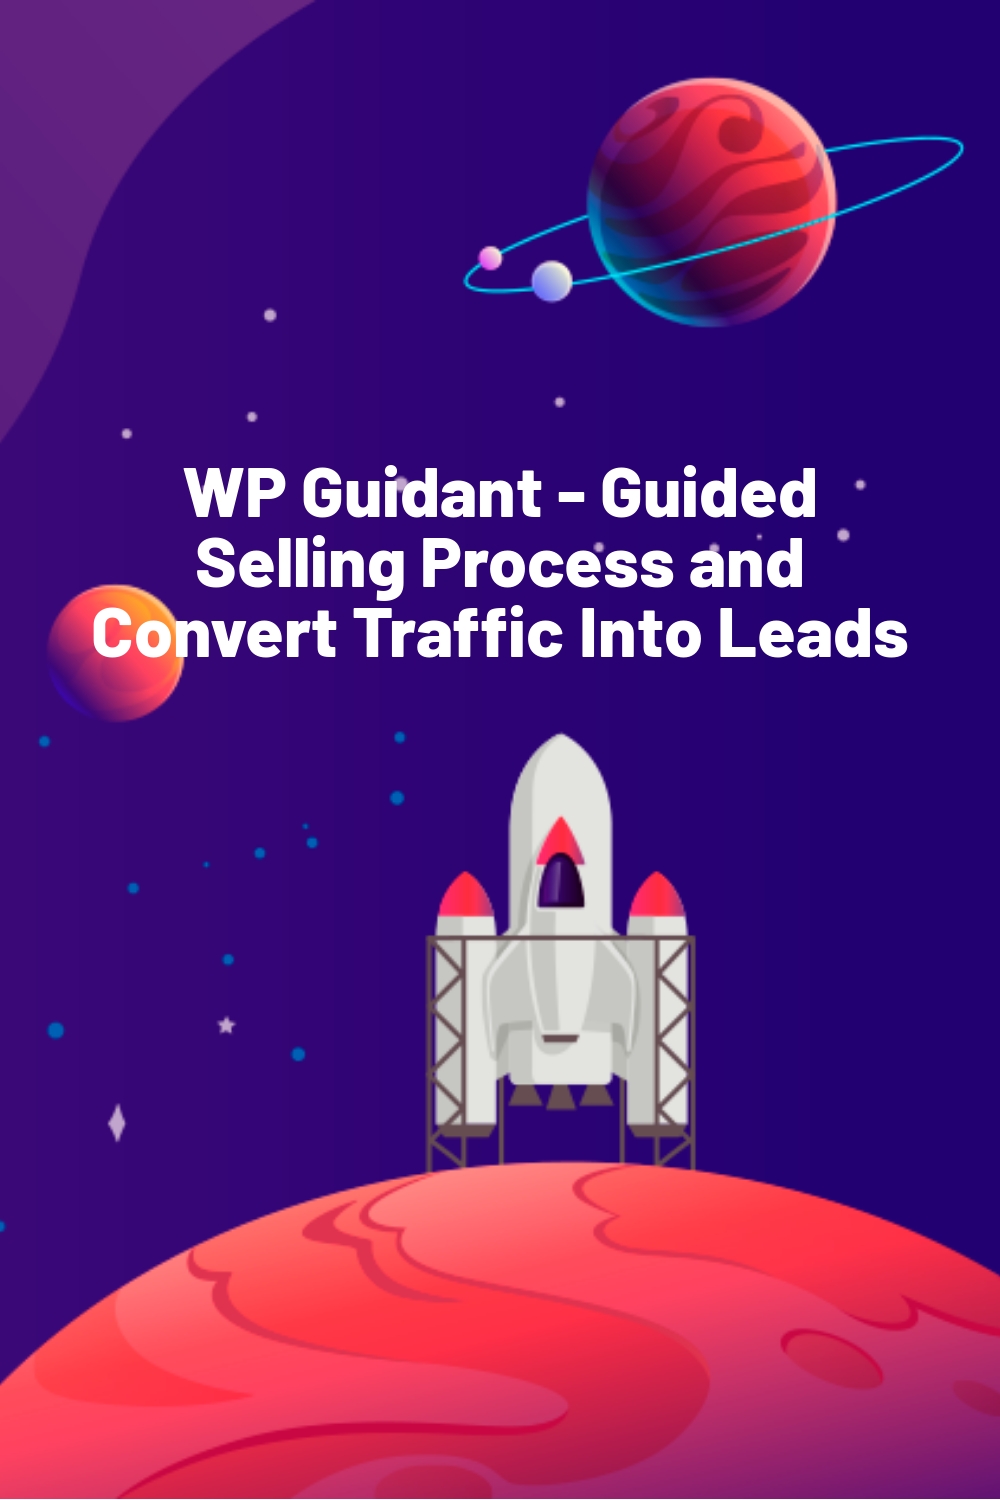 WP Guidant – Guided Selling Process and Convert Traffic Into Leads